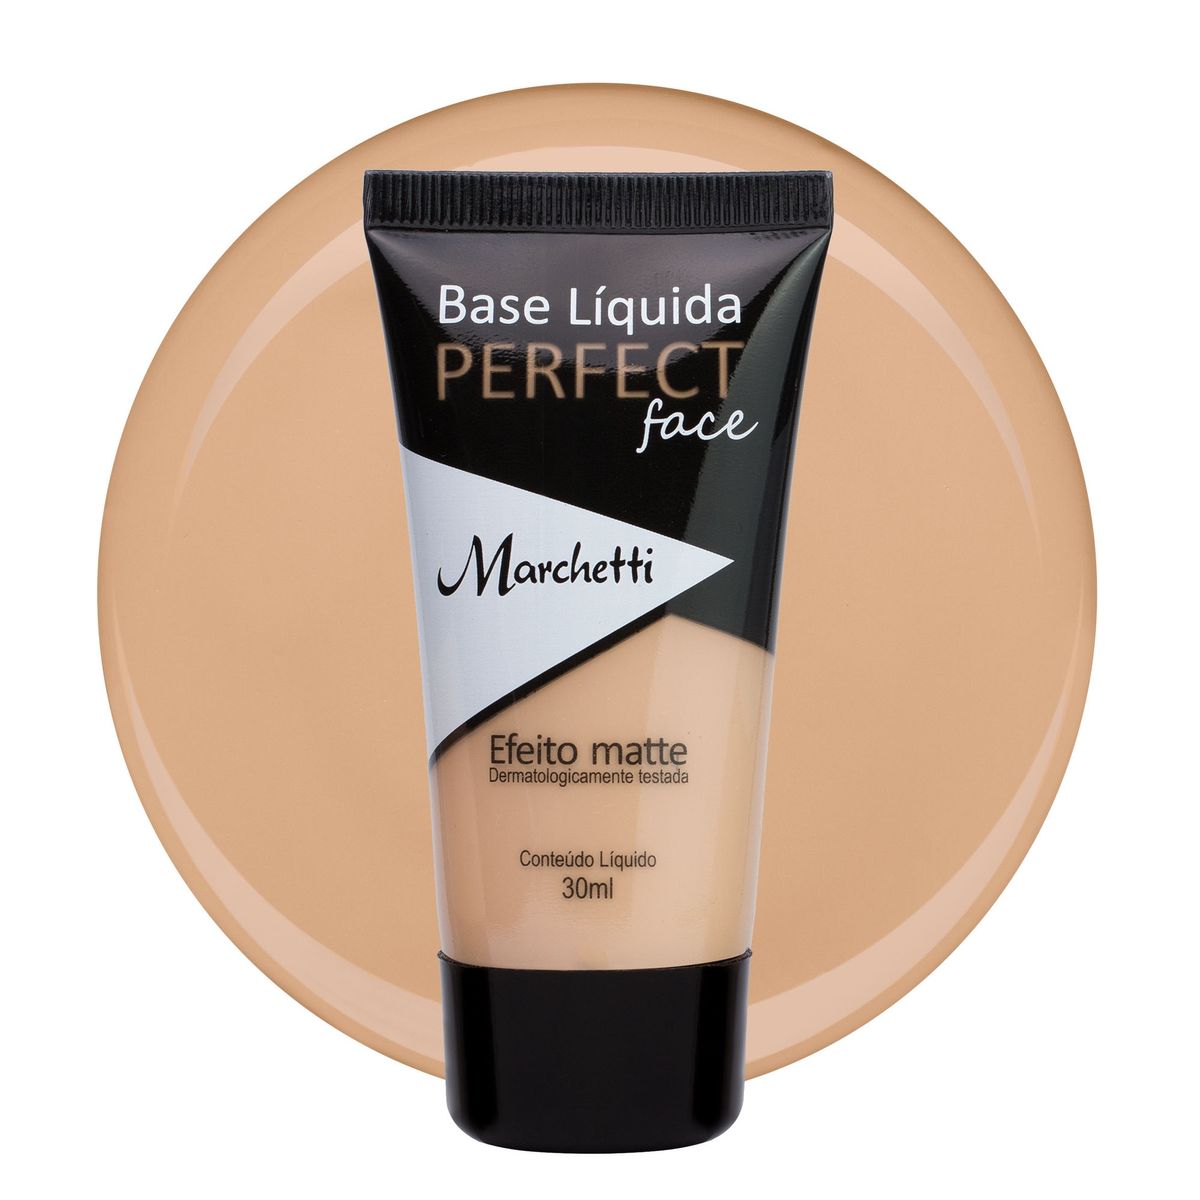 Base Líquida Marchetti Perfect Face 6 Bege 30ml image number 0